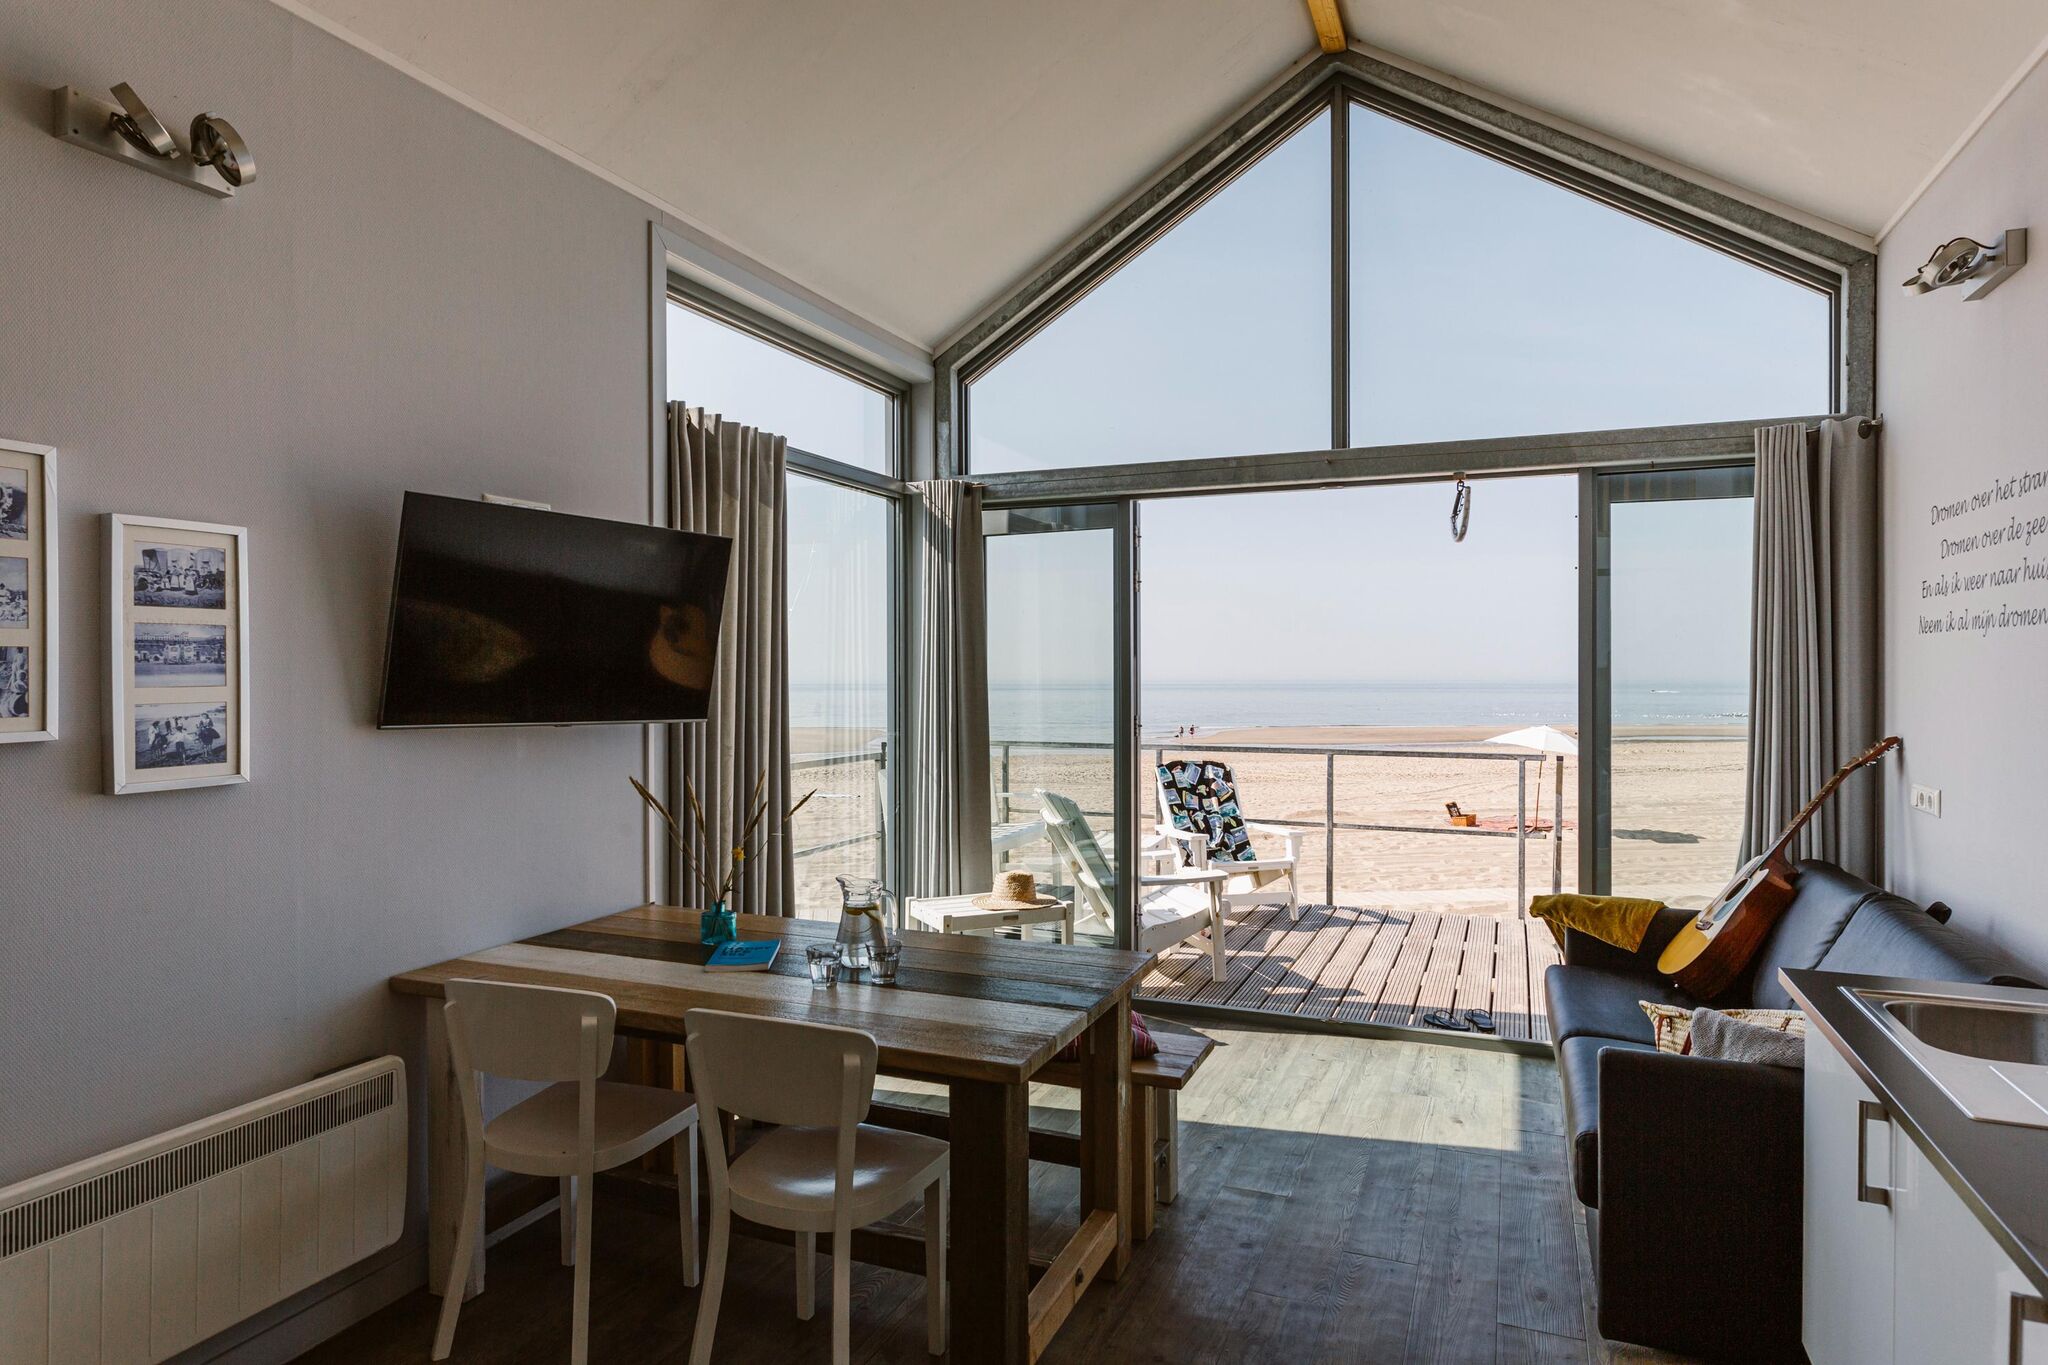 Beautifully located holiday home on the North Sea beach of Julianadorp